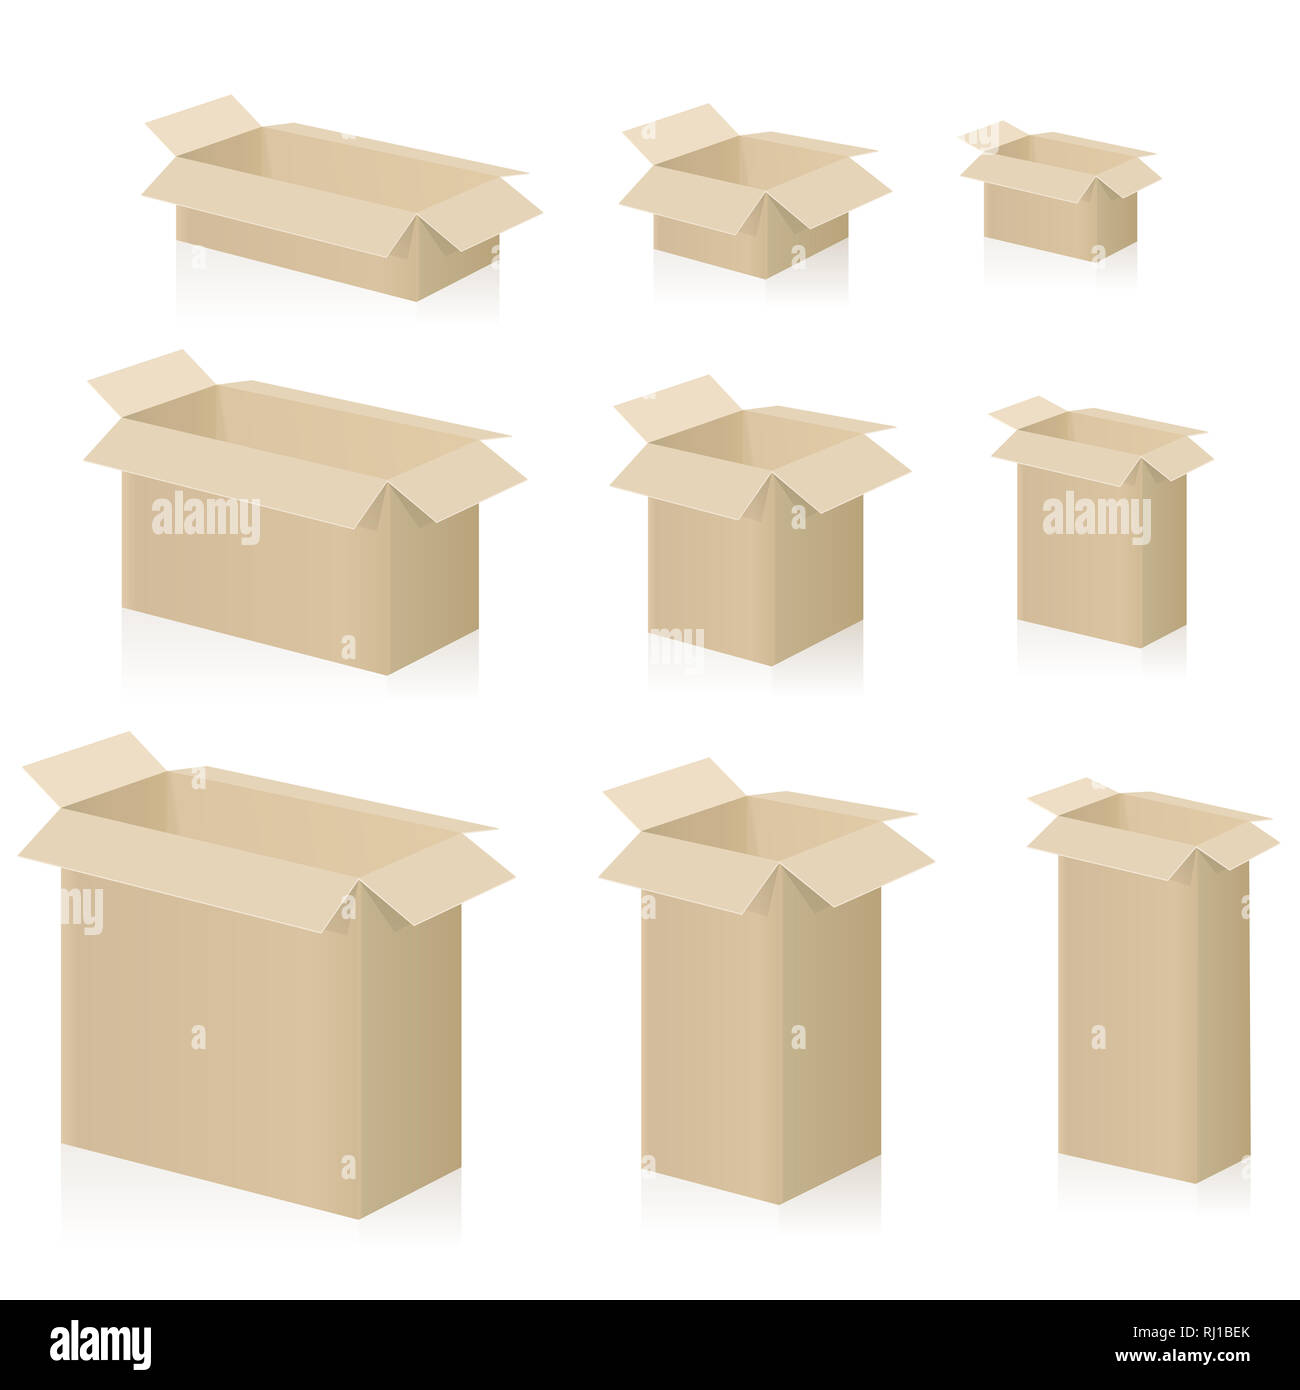 Cardboard boxes, different sizes, packing cases with open lid - illustration on white background. Stock Photo